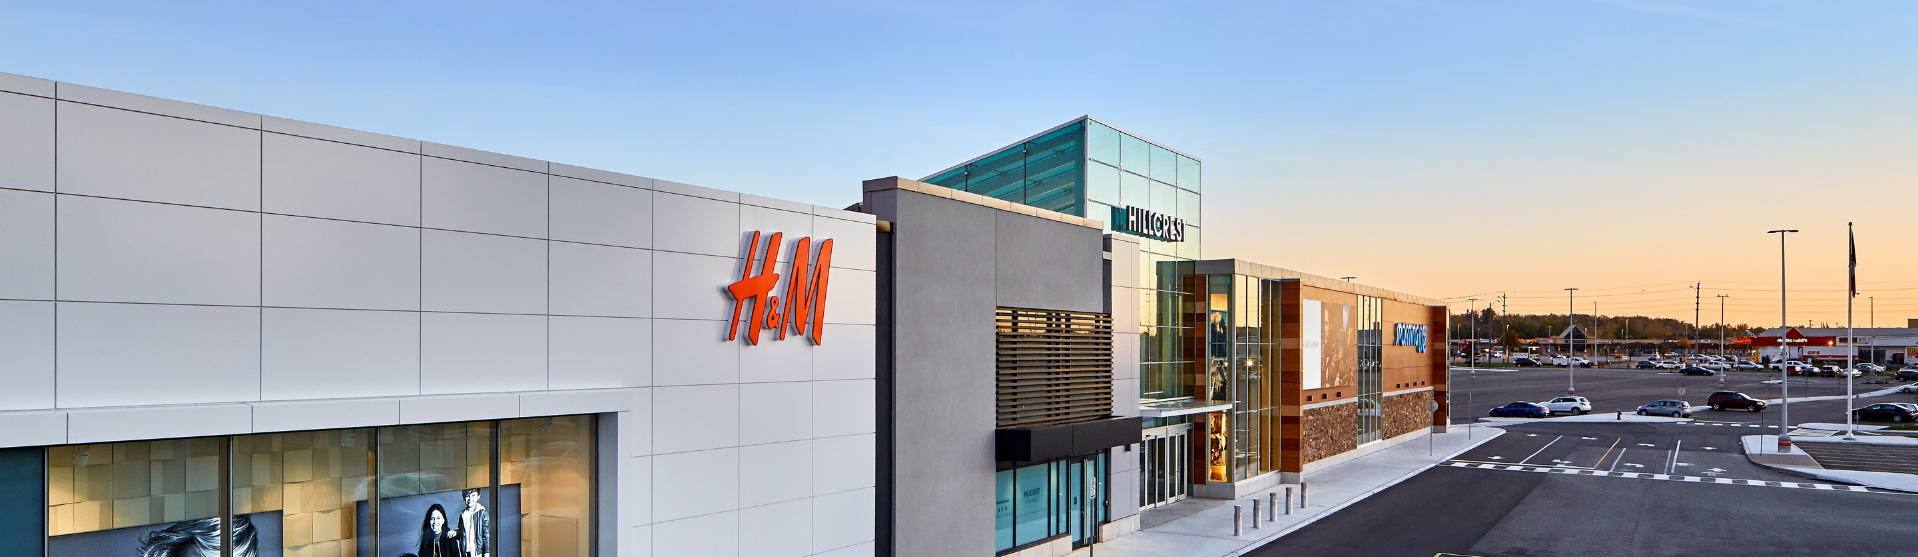 Exterior shot of Hillcrest with the H&M sign